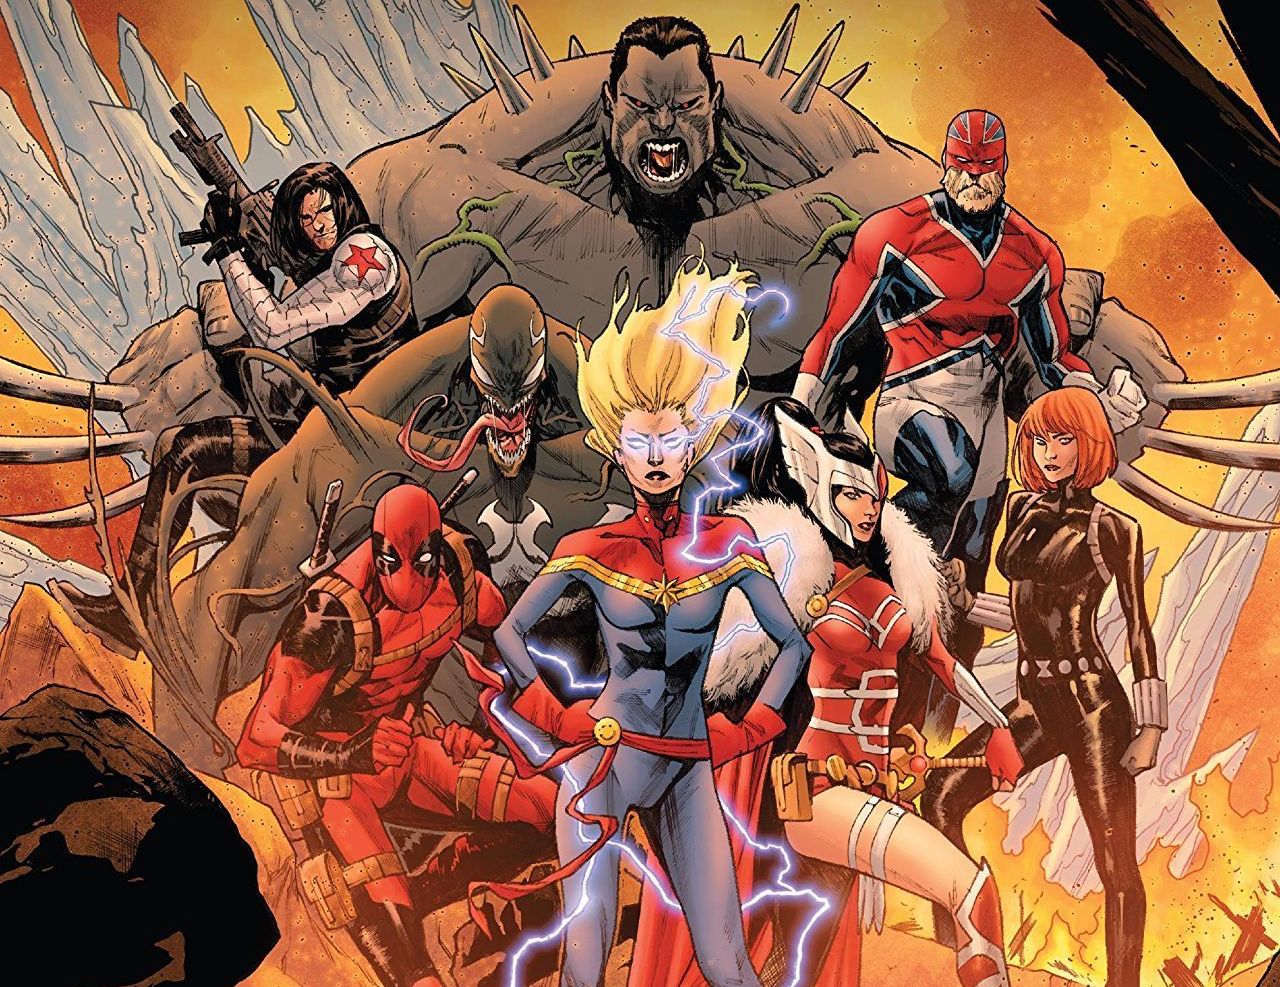 The War of the Realms: Strikeforce - The War Avengers #1 Review